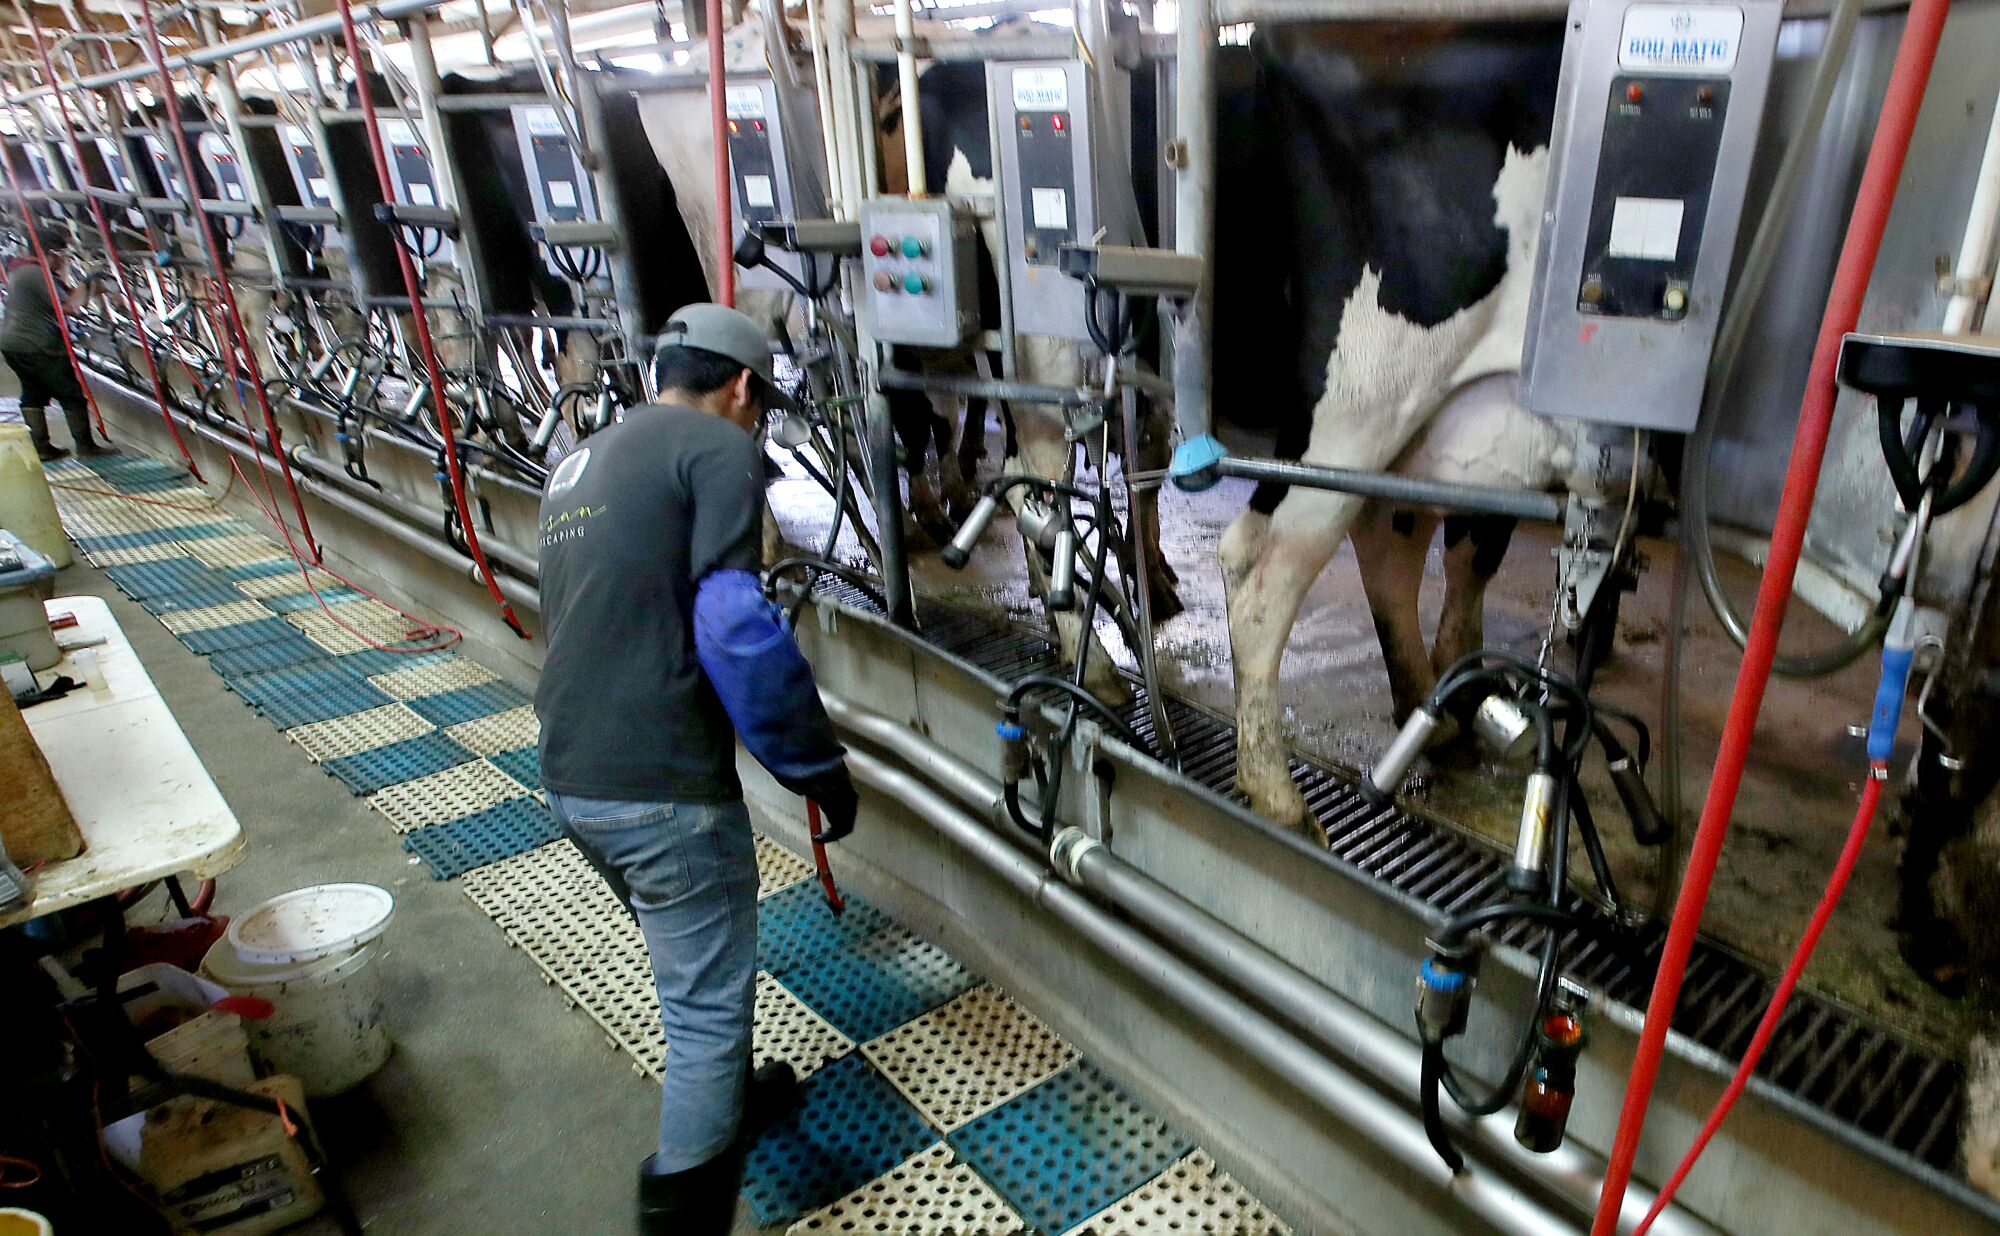 Cows are milked by machines while a man watches one of the machines.